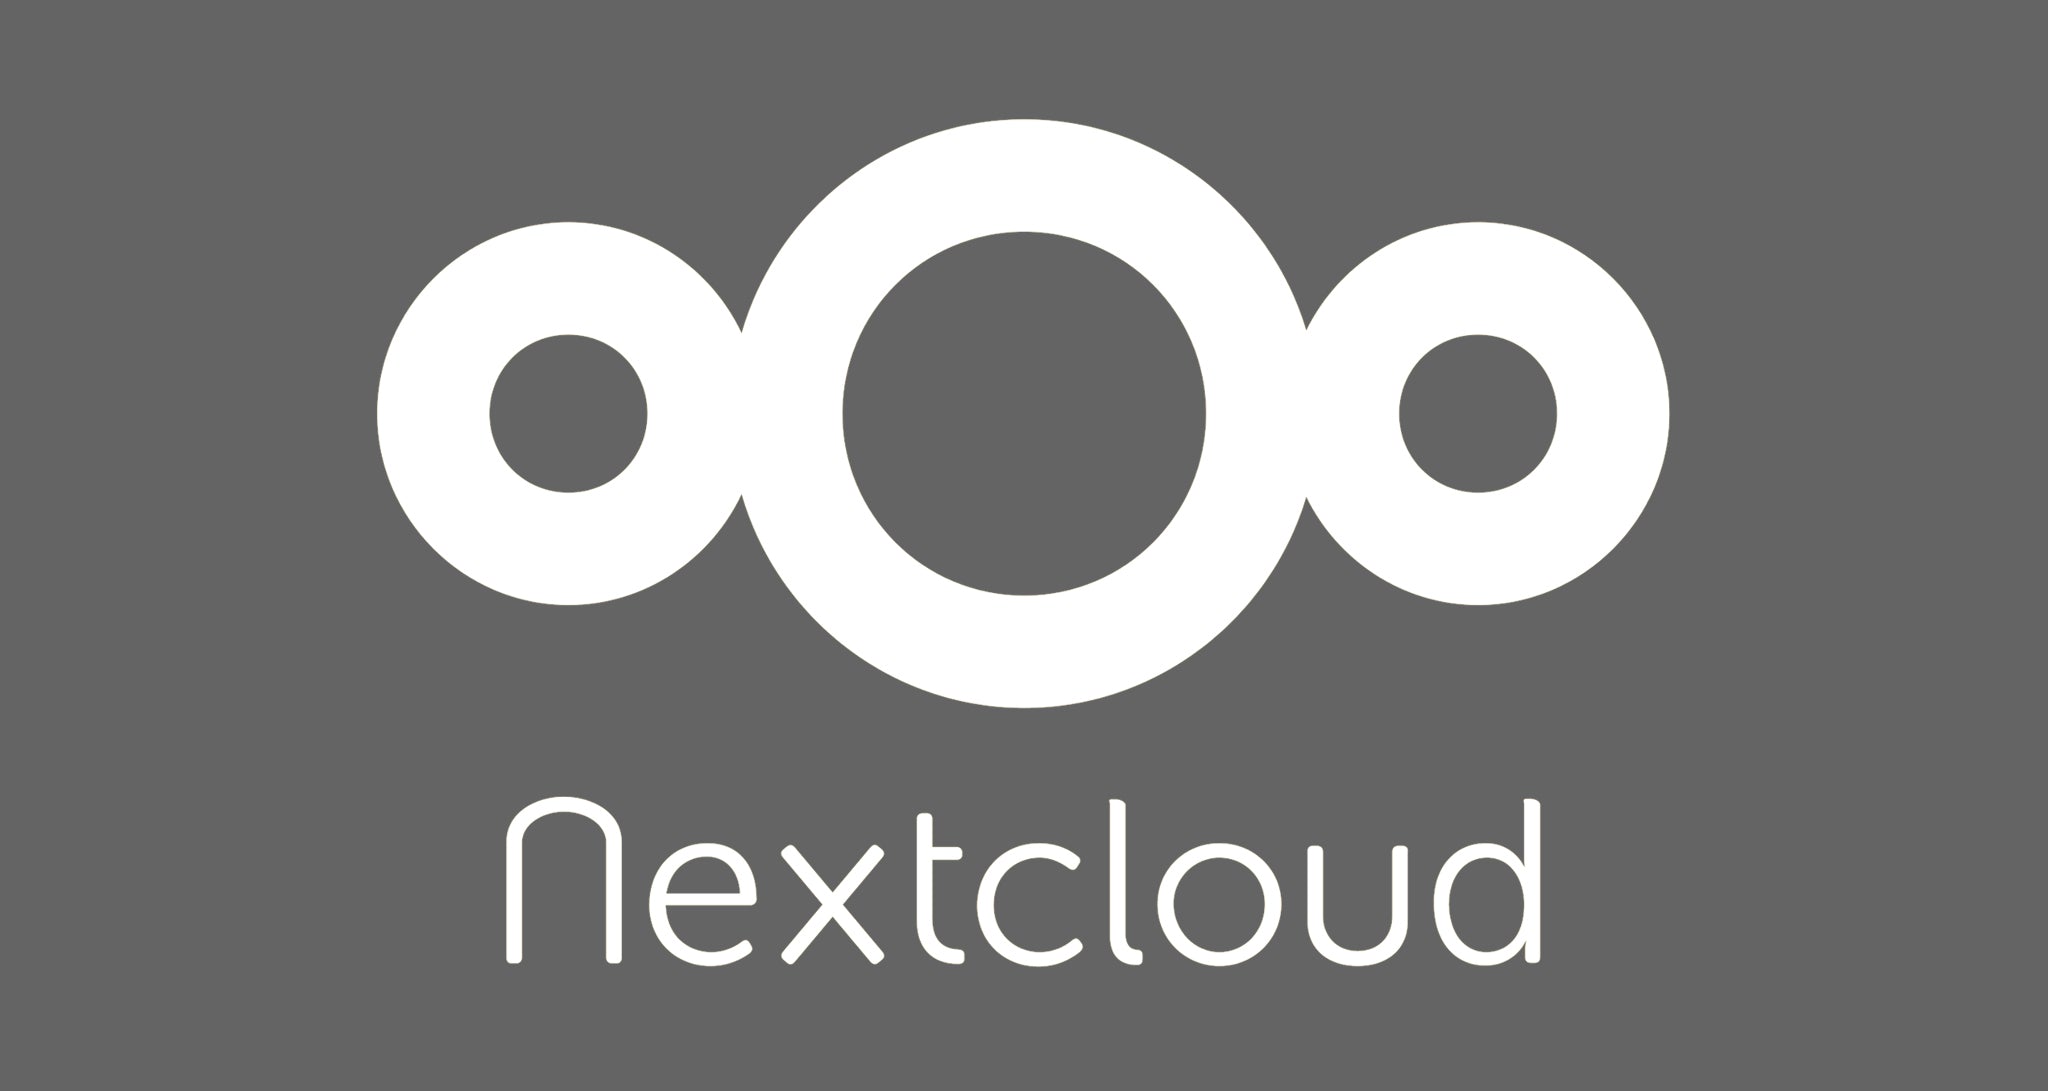 ClearCenter Adds New Data Storage Option to ClearOS With Nextcloud